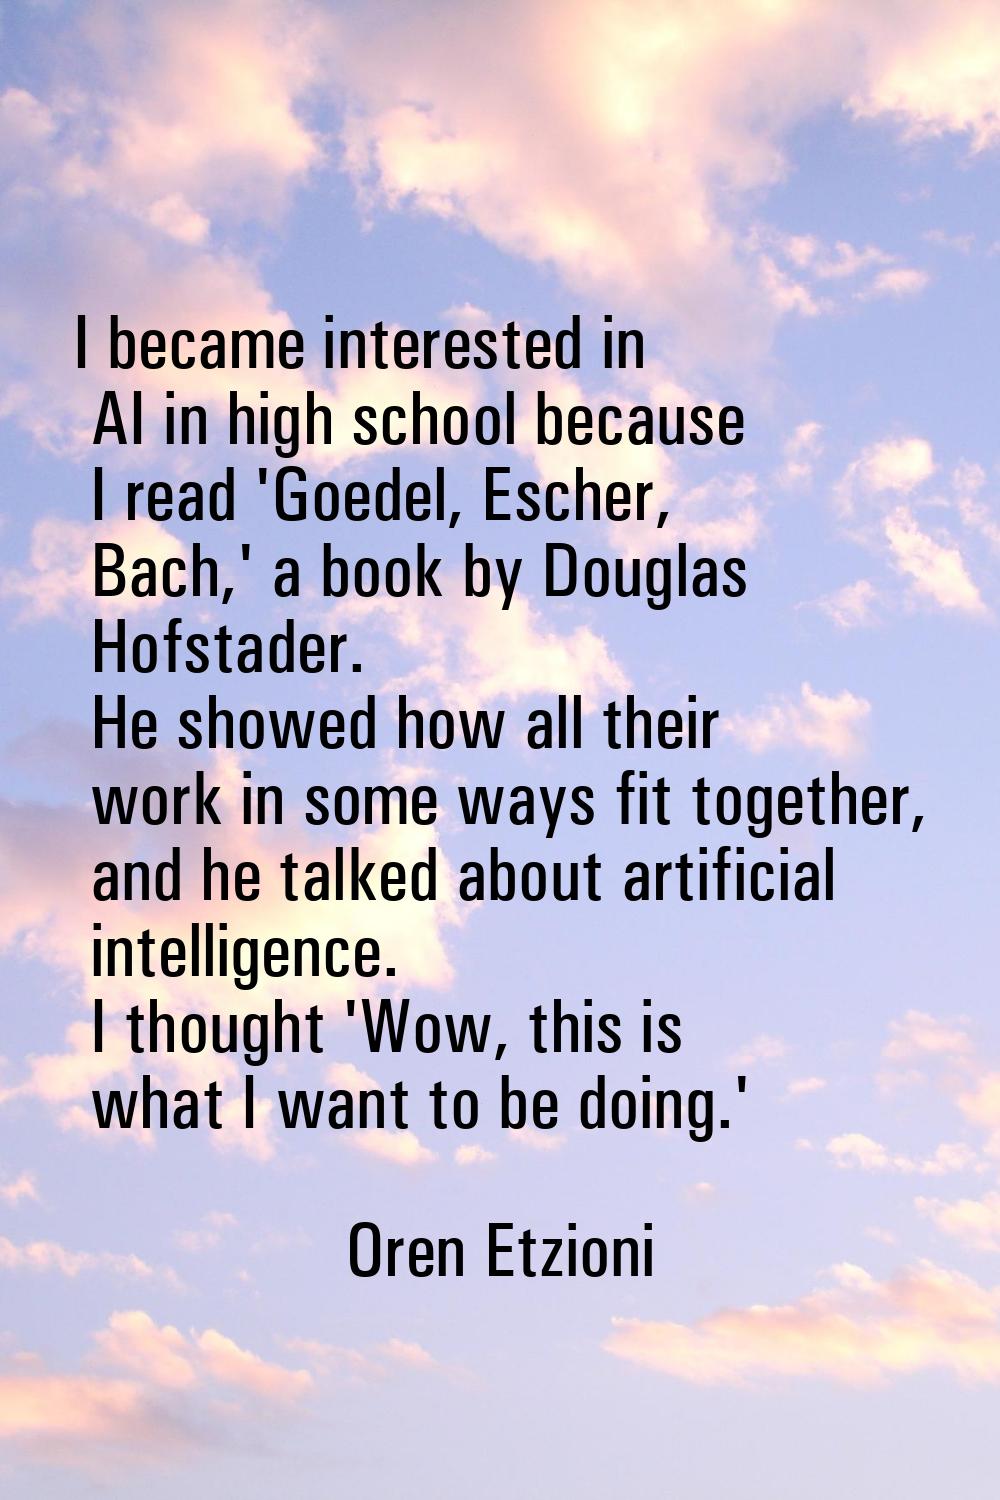 I became interested in AI in high school because I read 'Goedel, Escher, Bach,' a book by Douglas H